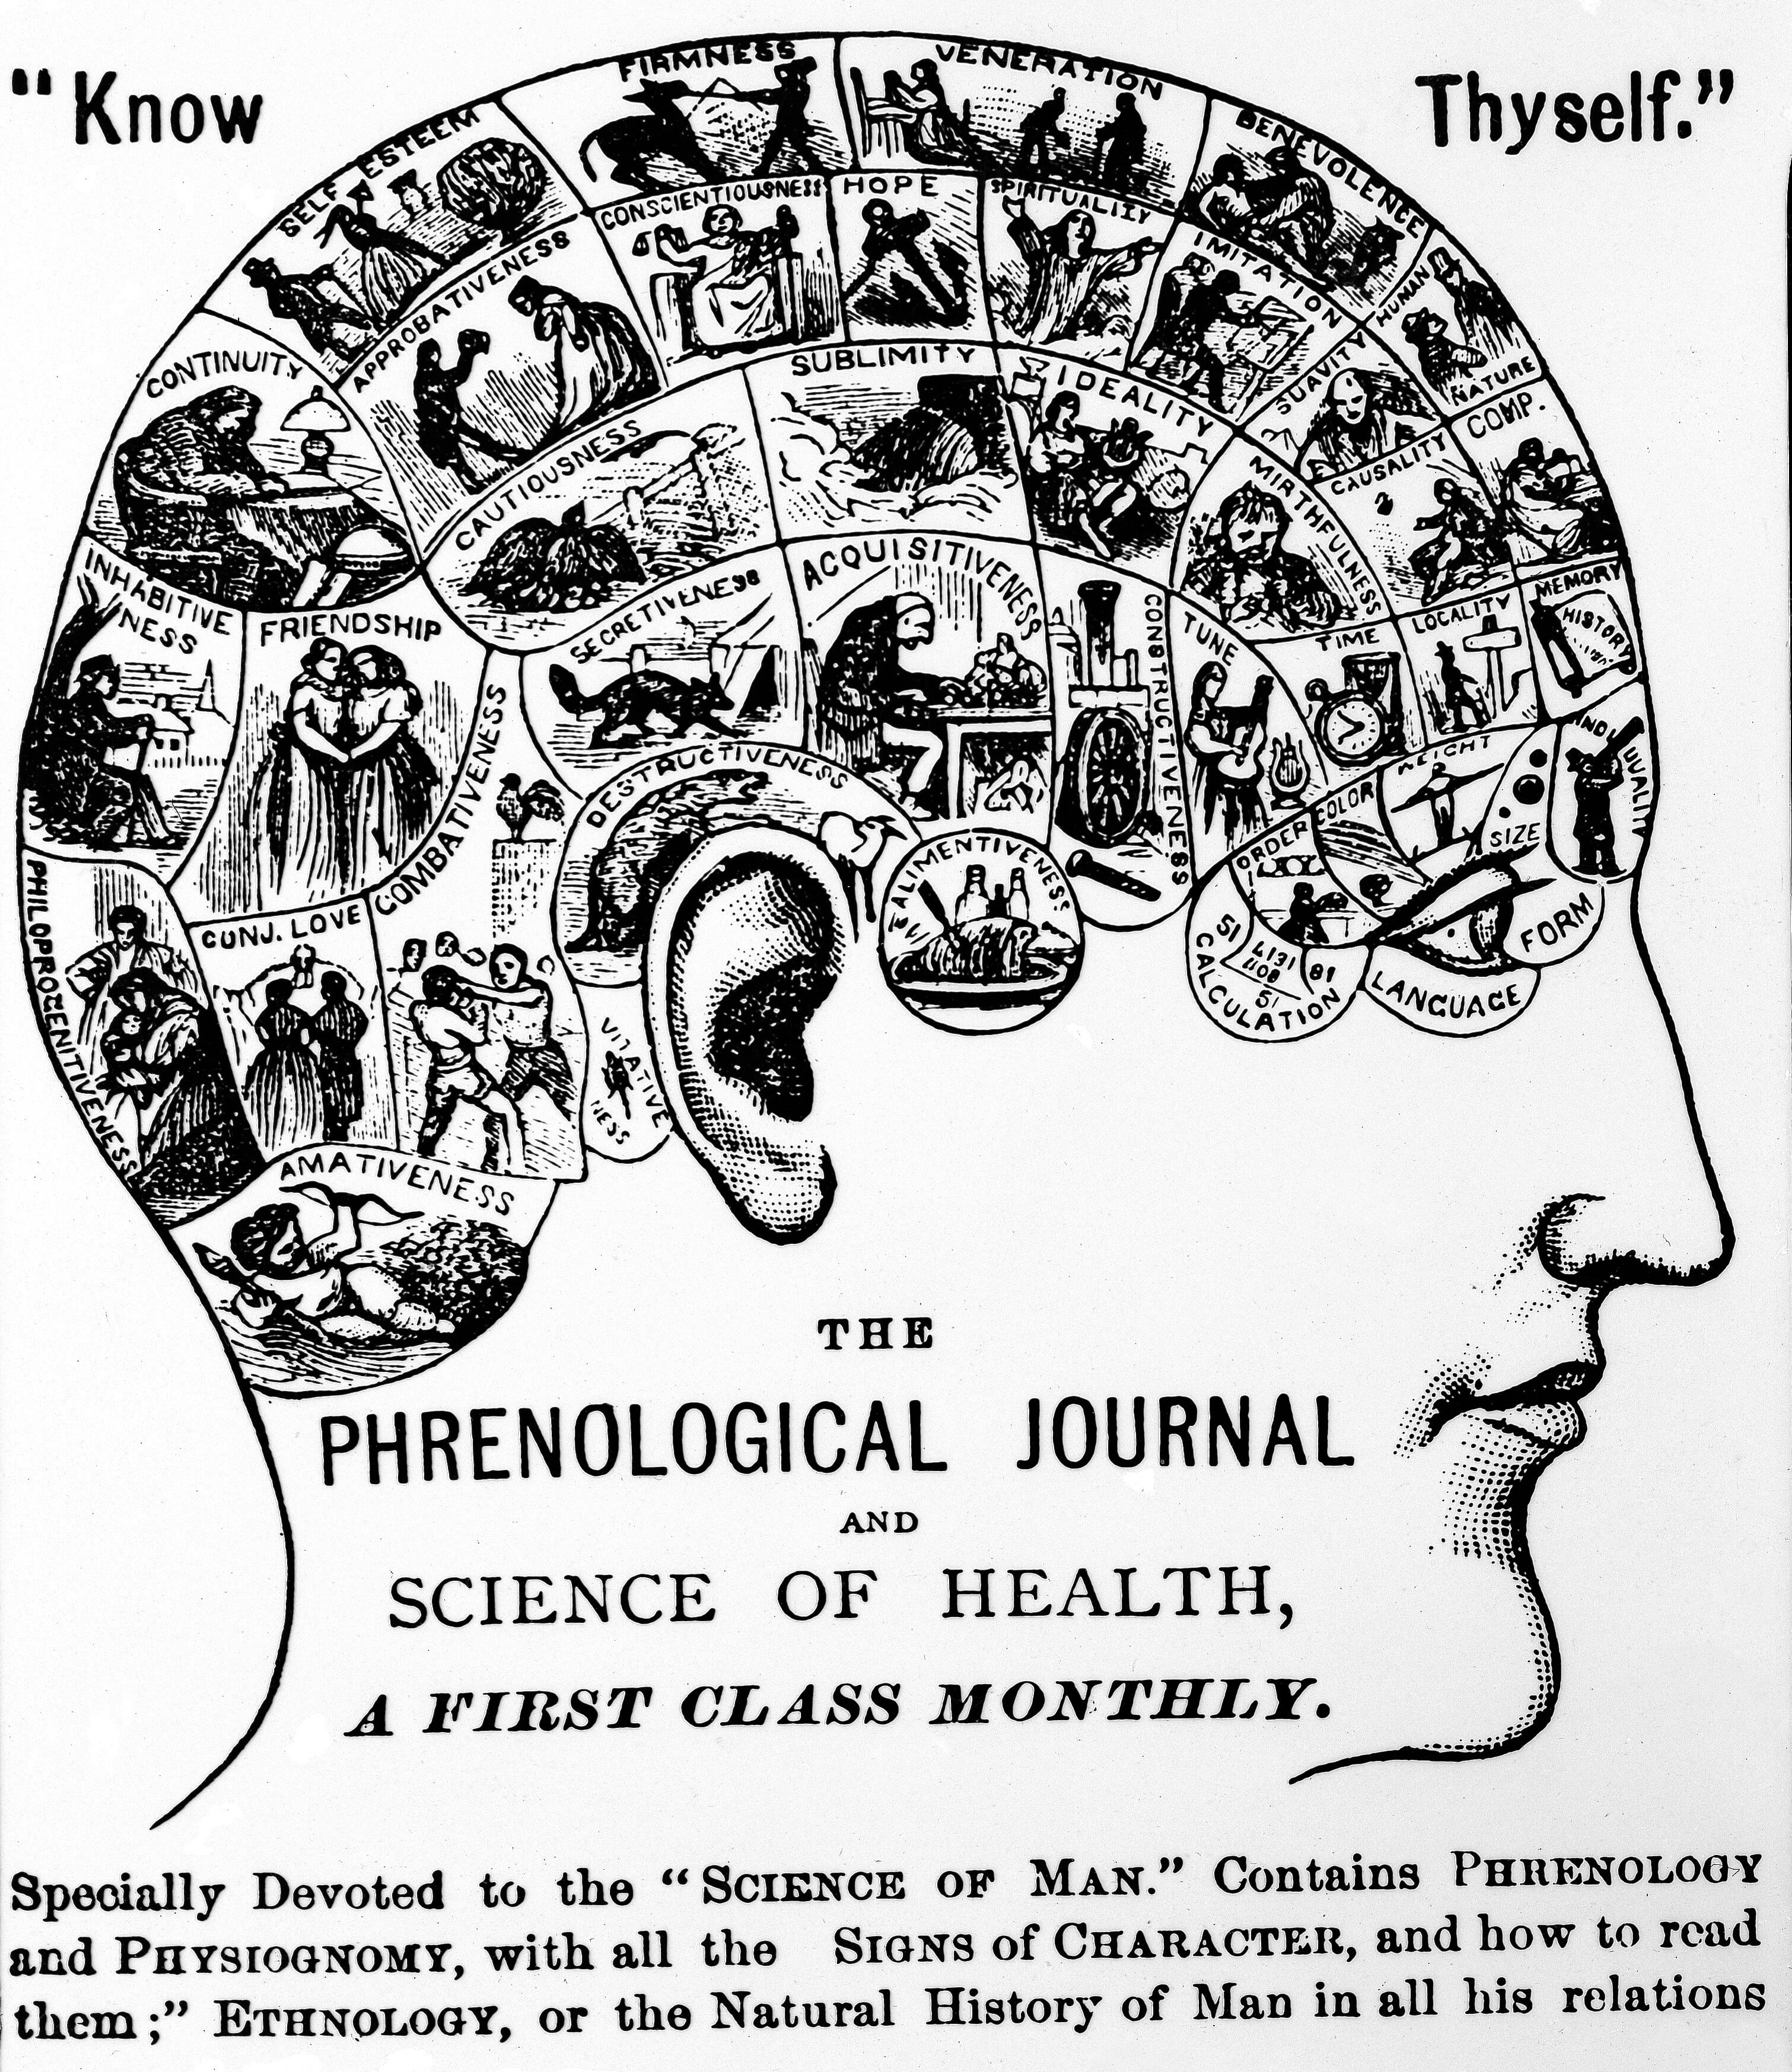 Chart from 'The Phrenological Journal' ("Know Thyself"), print from Dr. E. Clark.